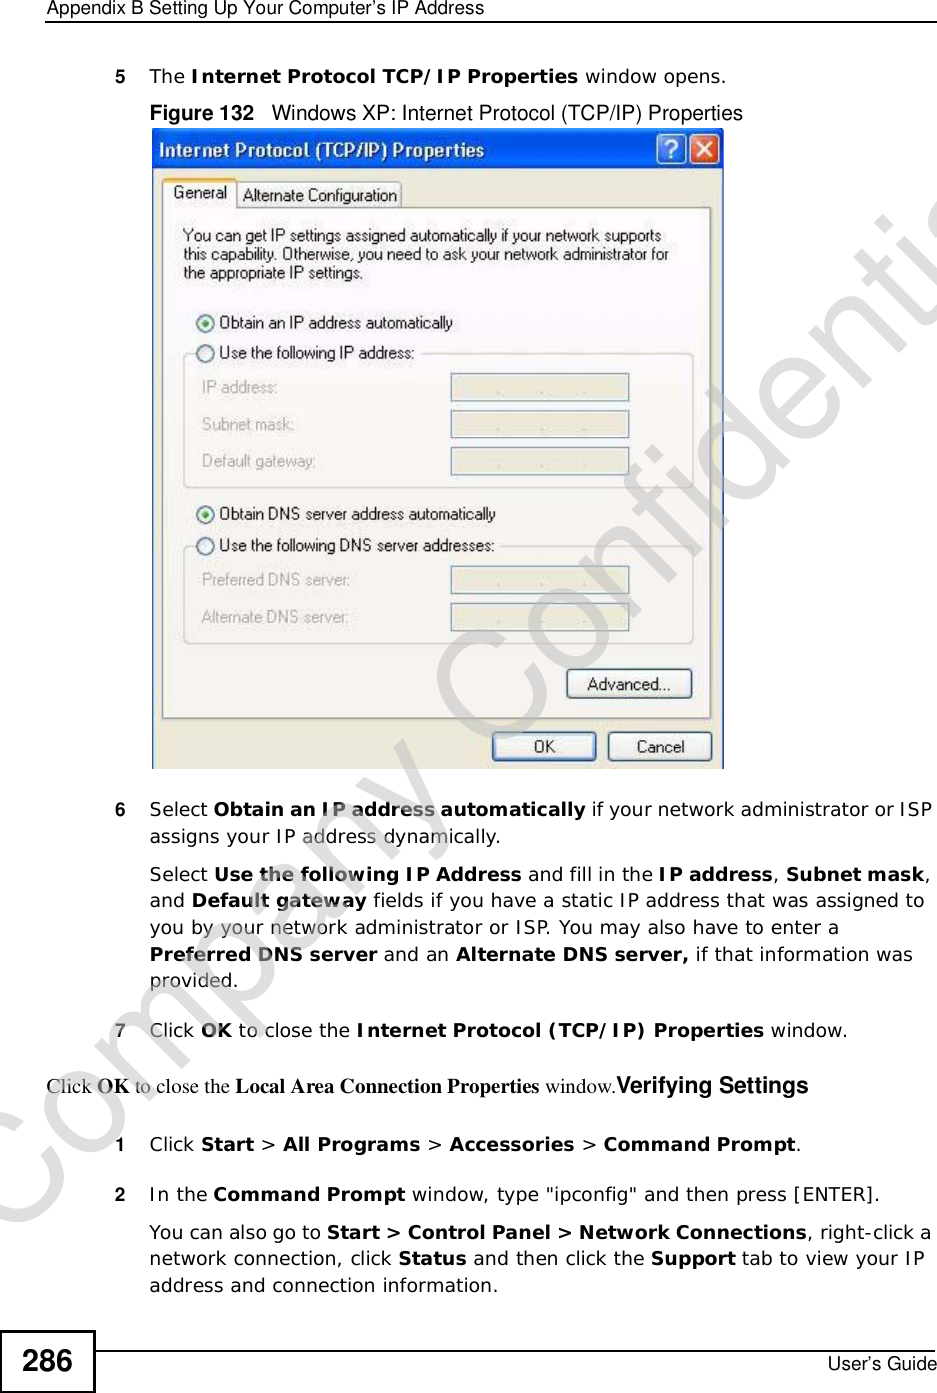 Appendix BSetting Up Your Computer’s IP AddressUser’s Guide2865The Internet Protocol TCP/IP Properties window opens.Figure 132   Windows XP: Internet Protocol (TCP/IP) Properties6Select Obtain an IP address automatically if your network administrator or ISP assigns your IP address dynamically.Select Use the following IP Address and fill in the IP address,Subnet mask,and Default gateway fields if you have a static IP address that was assigned to you by your network administrator or ISP. You may also have to enter a Preferred DNS server and an AlternateDNS server, if that information was provided.7Click OK to close the Internet Protocol (TCP/IP) Properties window.Click OK to close the Local Area Connection Properties window.Verifying Settings1Click Start &gt; All Programs &gt; Accessories &gt; Command Prompt.2In the Command Prompt window, type &quot;ipconfig&quot; and then press [ENTER]. You can also go to Start &gt; Control Panel &gt; Network Connections, right-click a network connection, click Status and then click the Support tab to view your IP address and connection information.Company Confidential